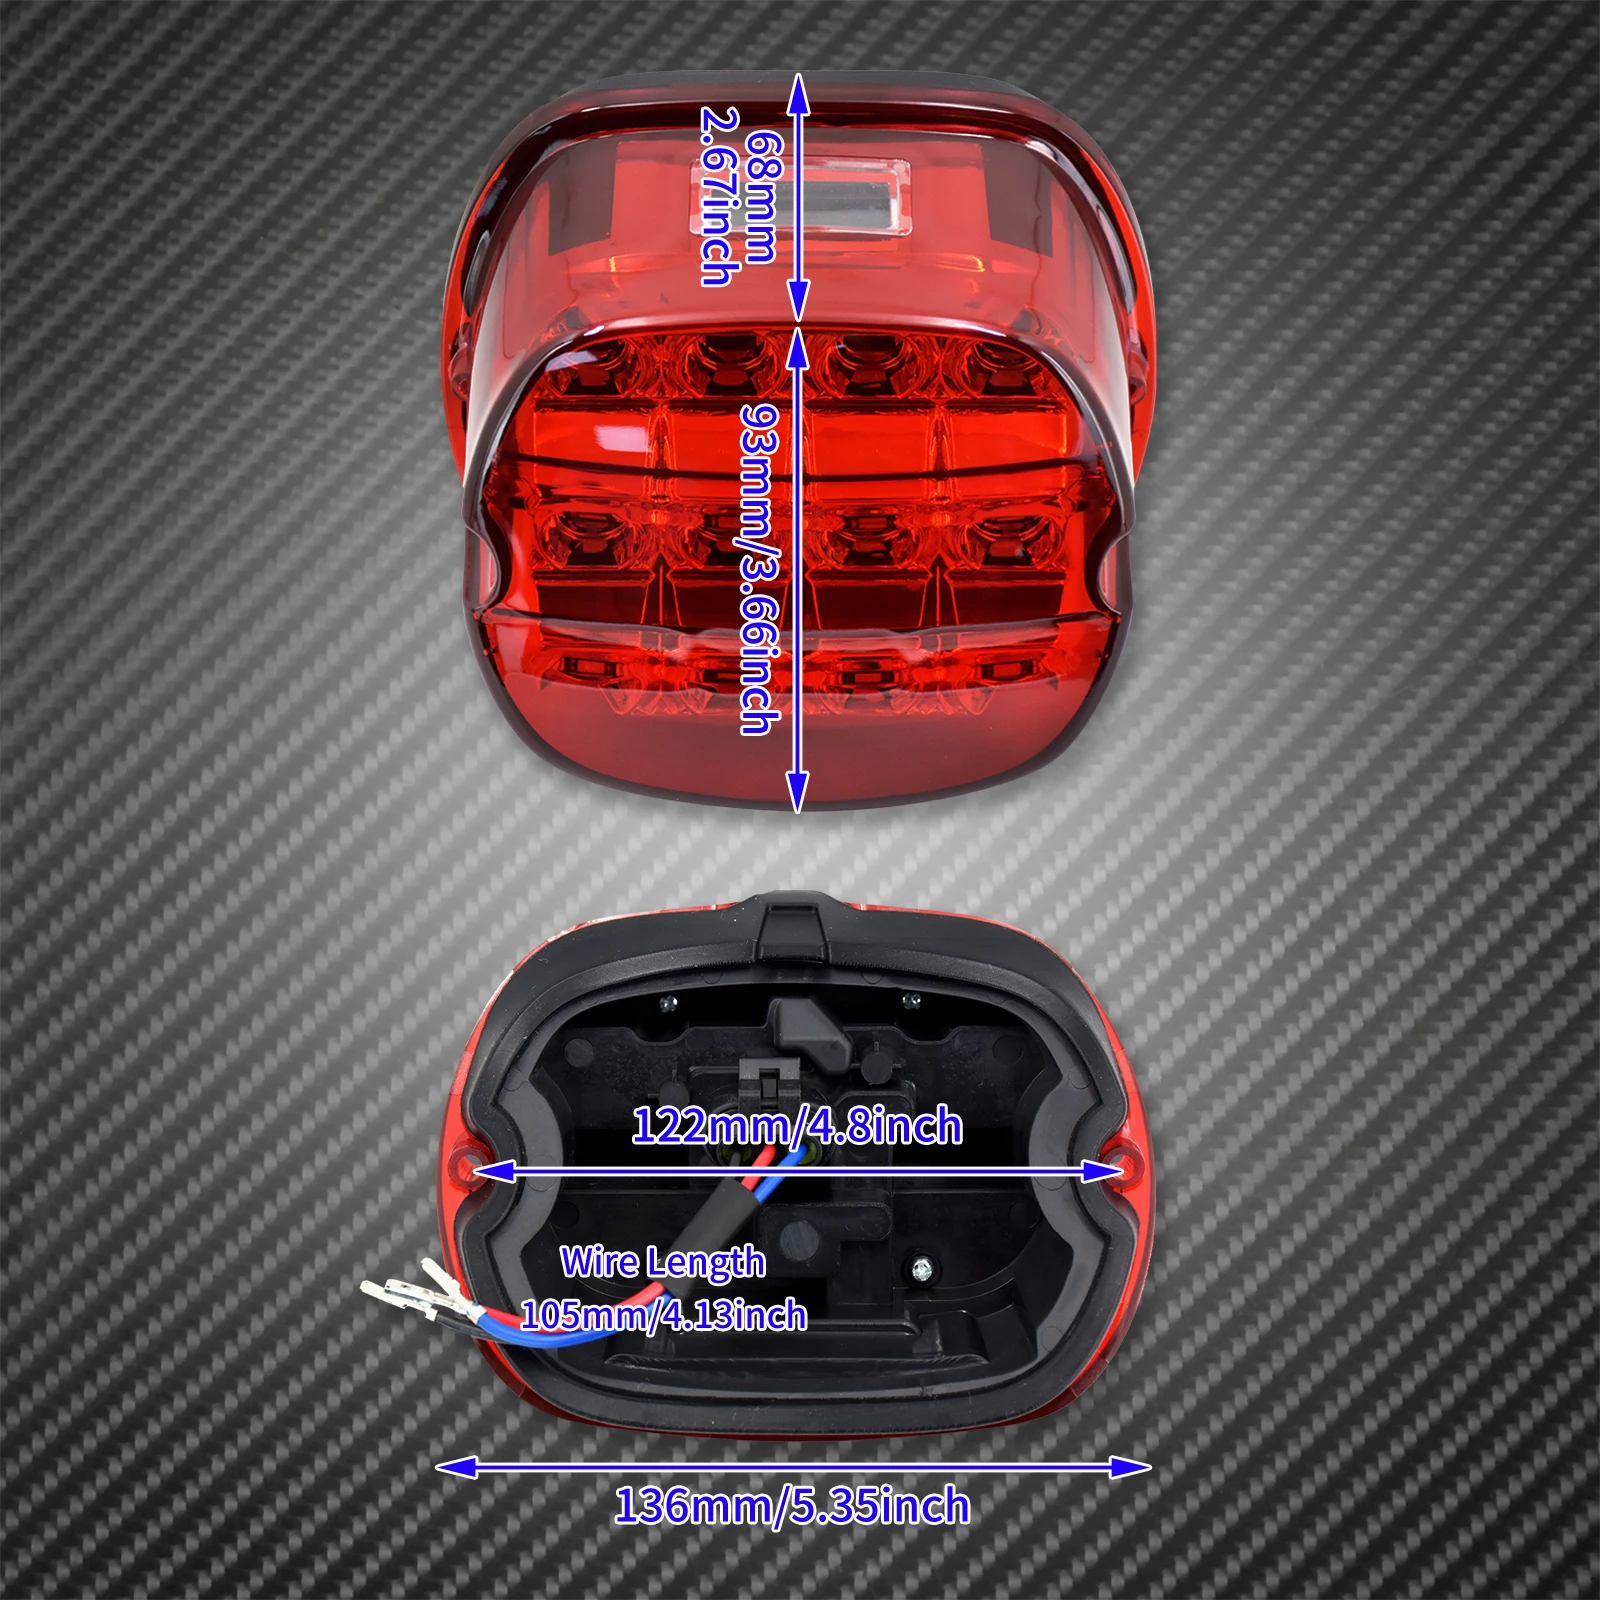 LED Brake Tail Light For Harley Dyna Fat Boy FLSTF Night Train FXSTB Softail Sportster Road King Electra Glide Road Glide images - 6